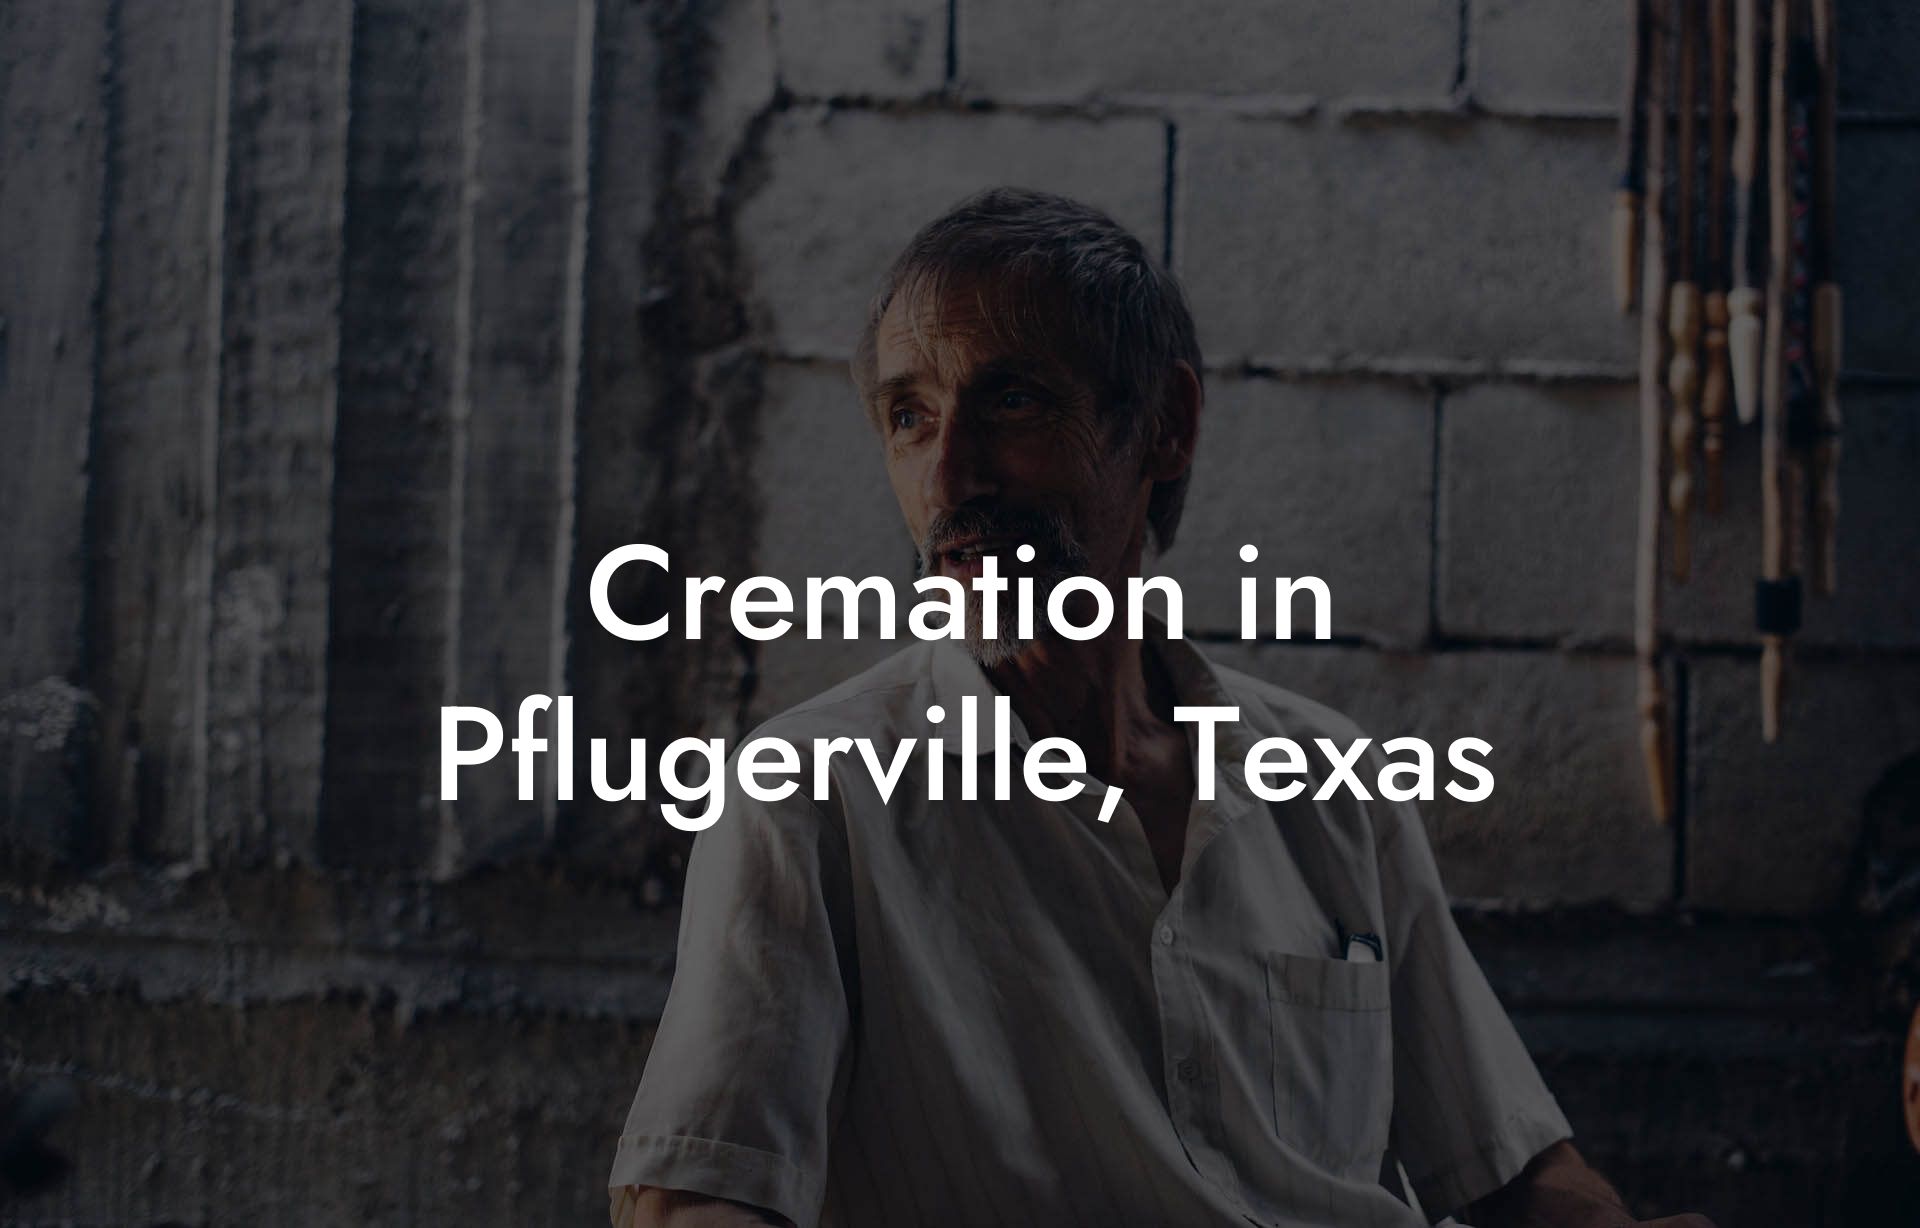 Cremation in Pflugerville, Texas